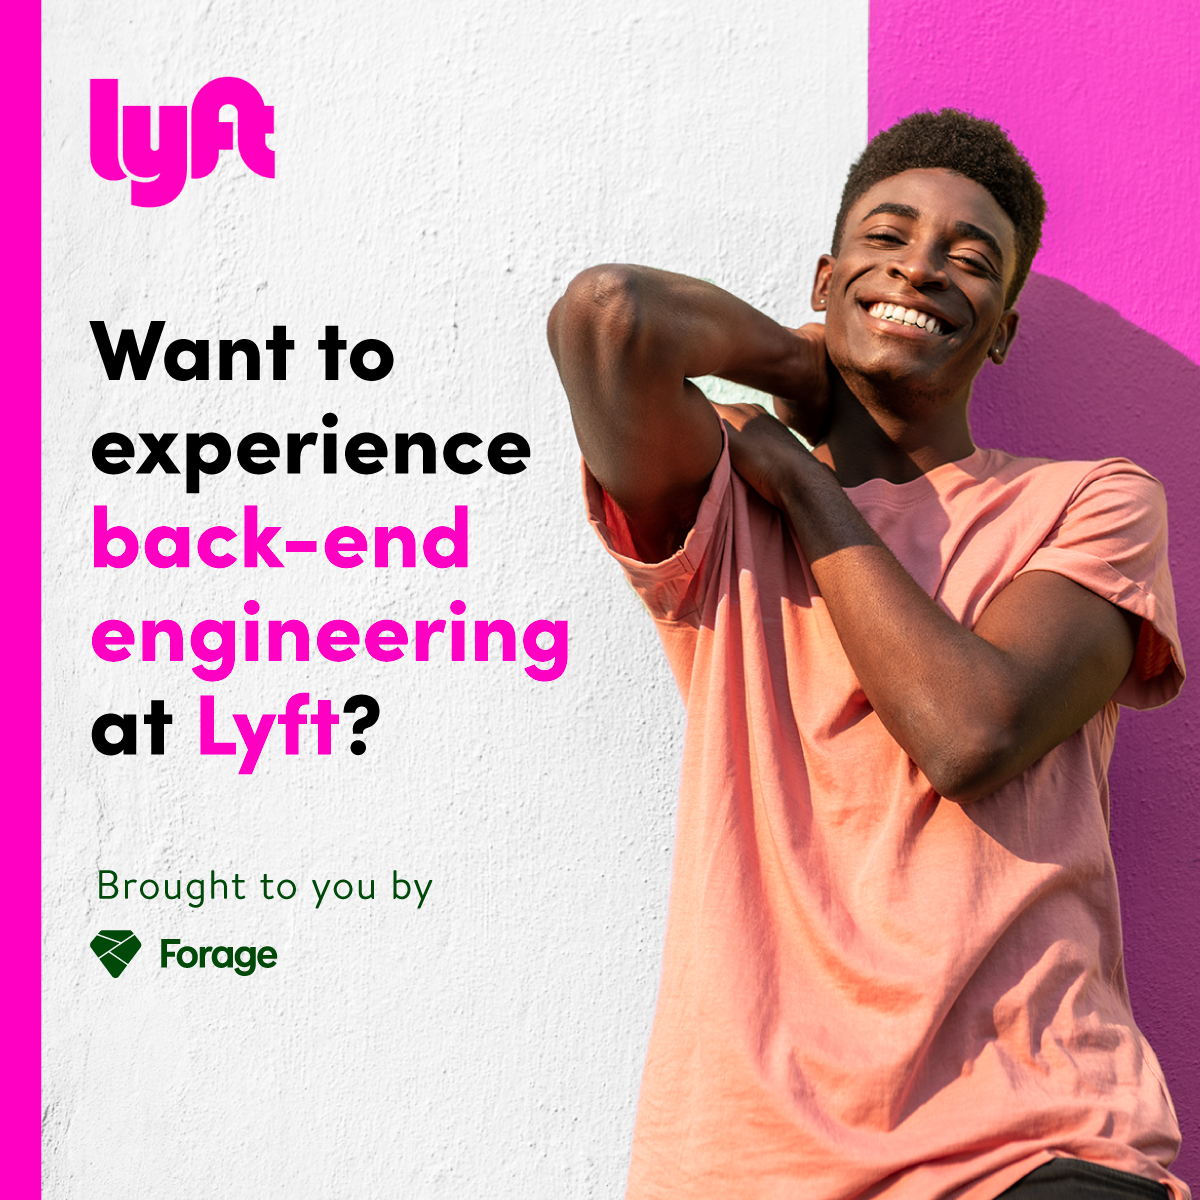 FOR_020222_Lyft_FB_Ad_Images_1200x1200_2A.png